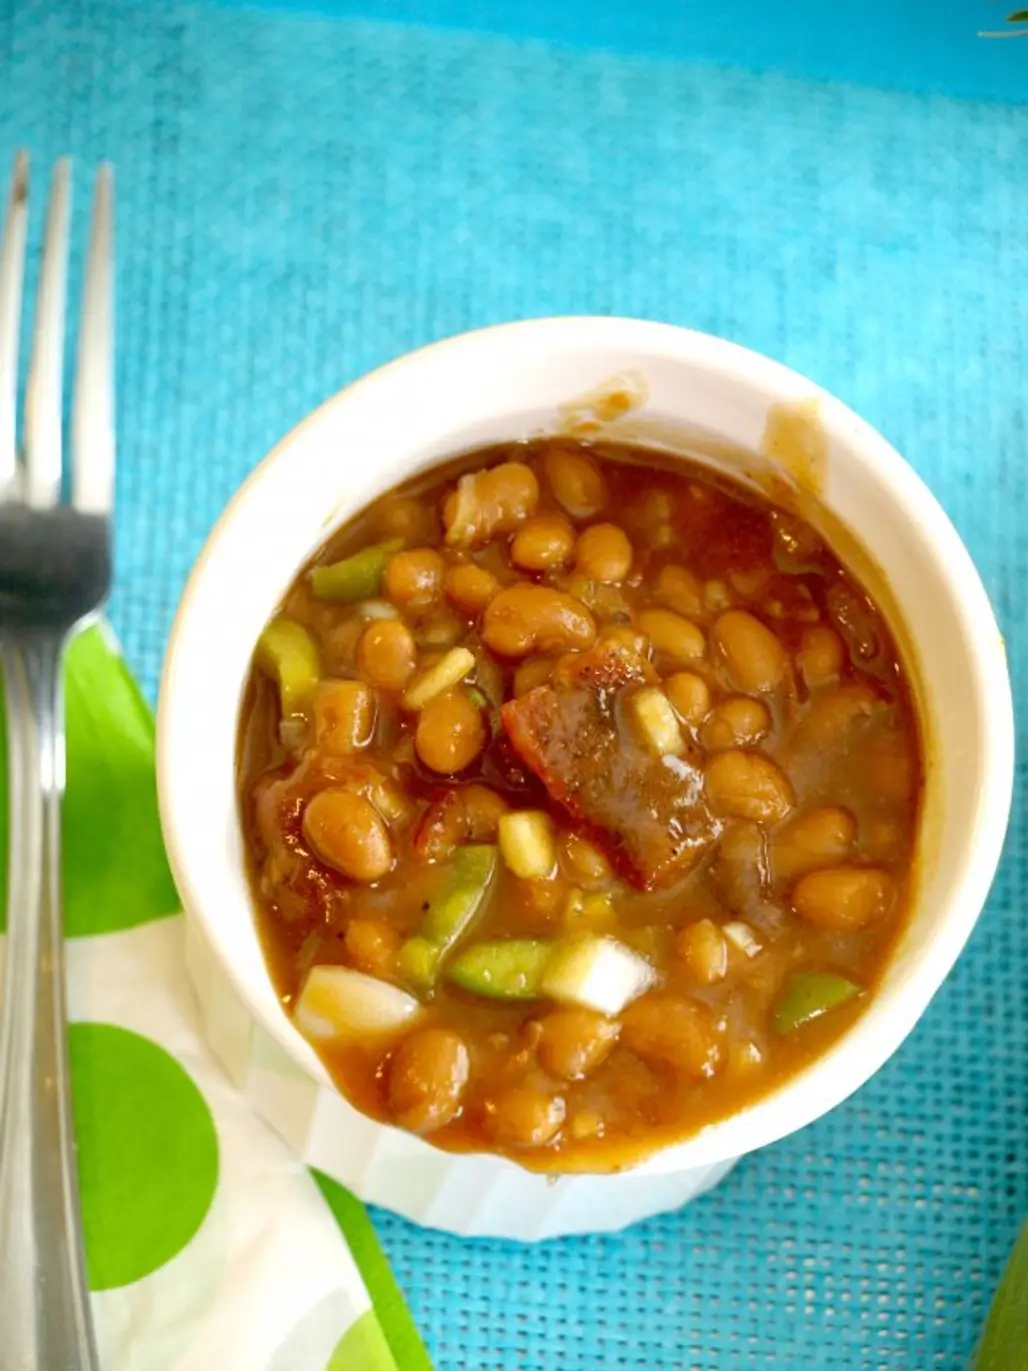 Go for the Baked Beans before They’re Gone